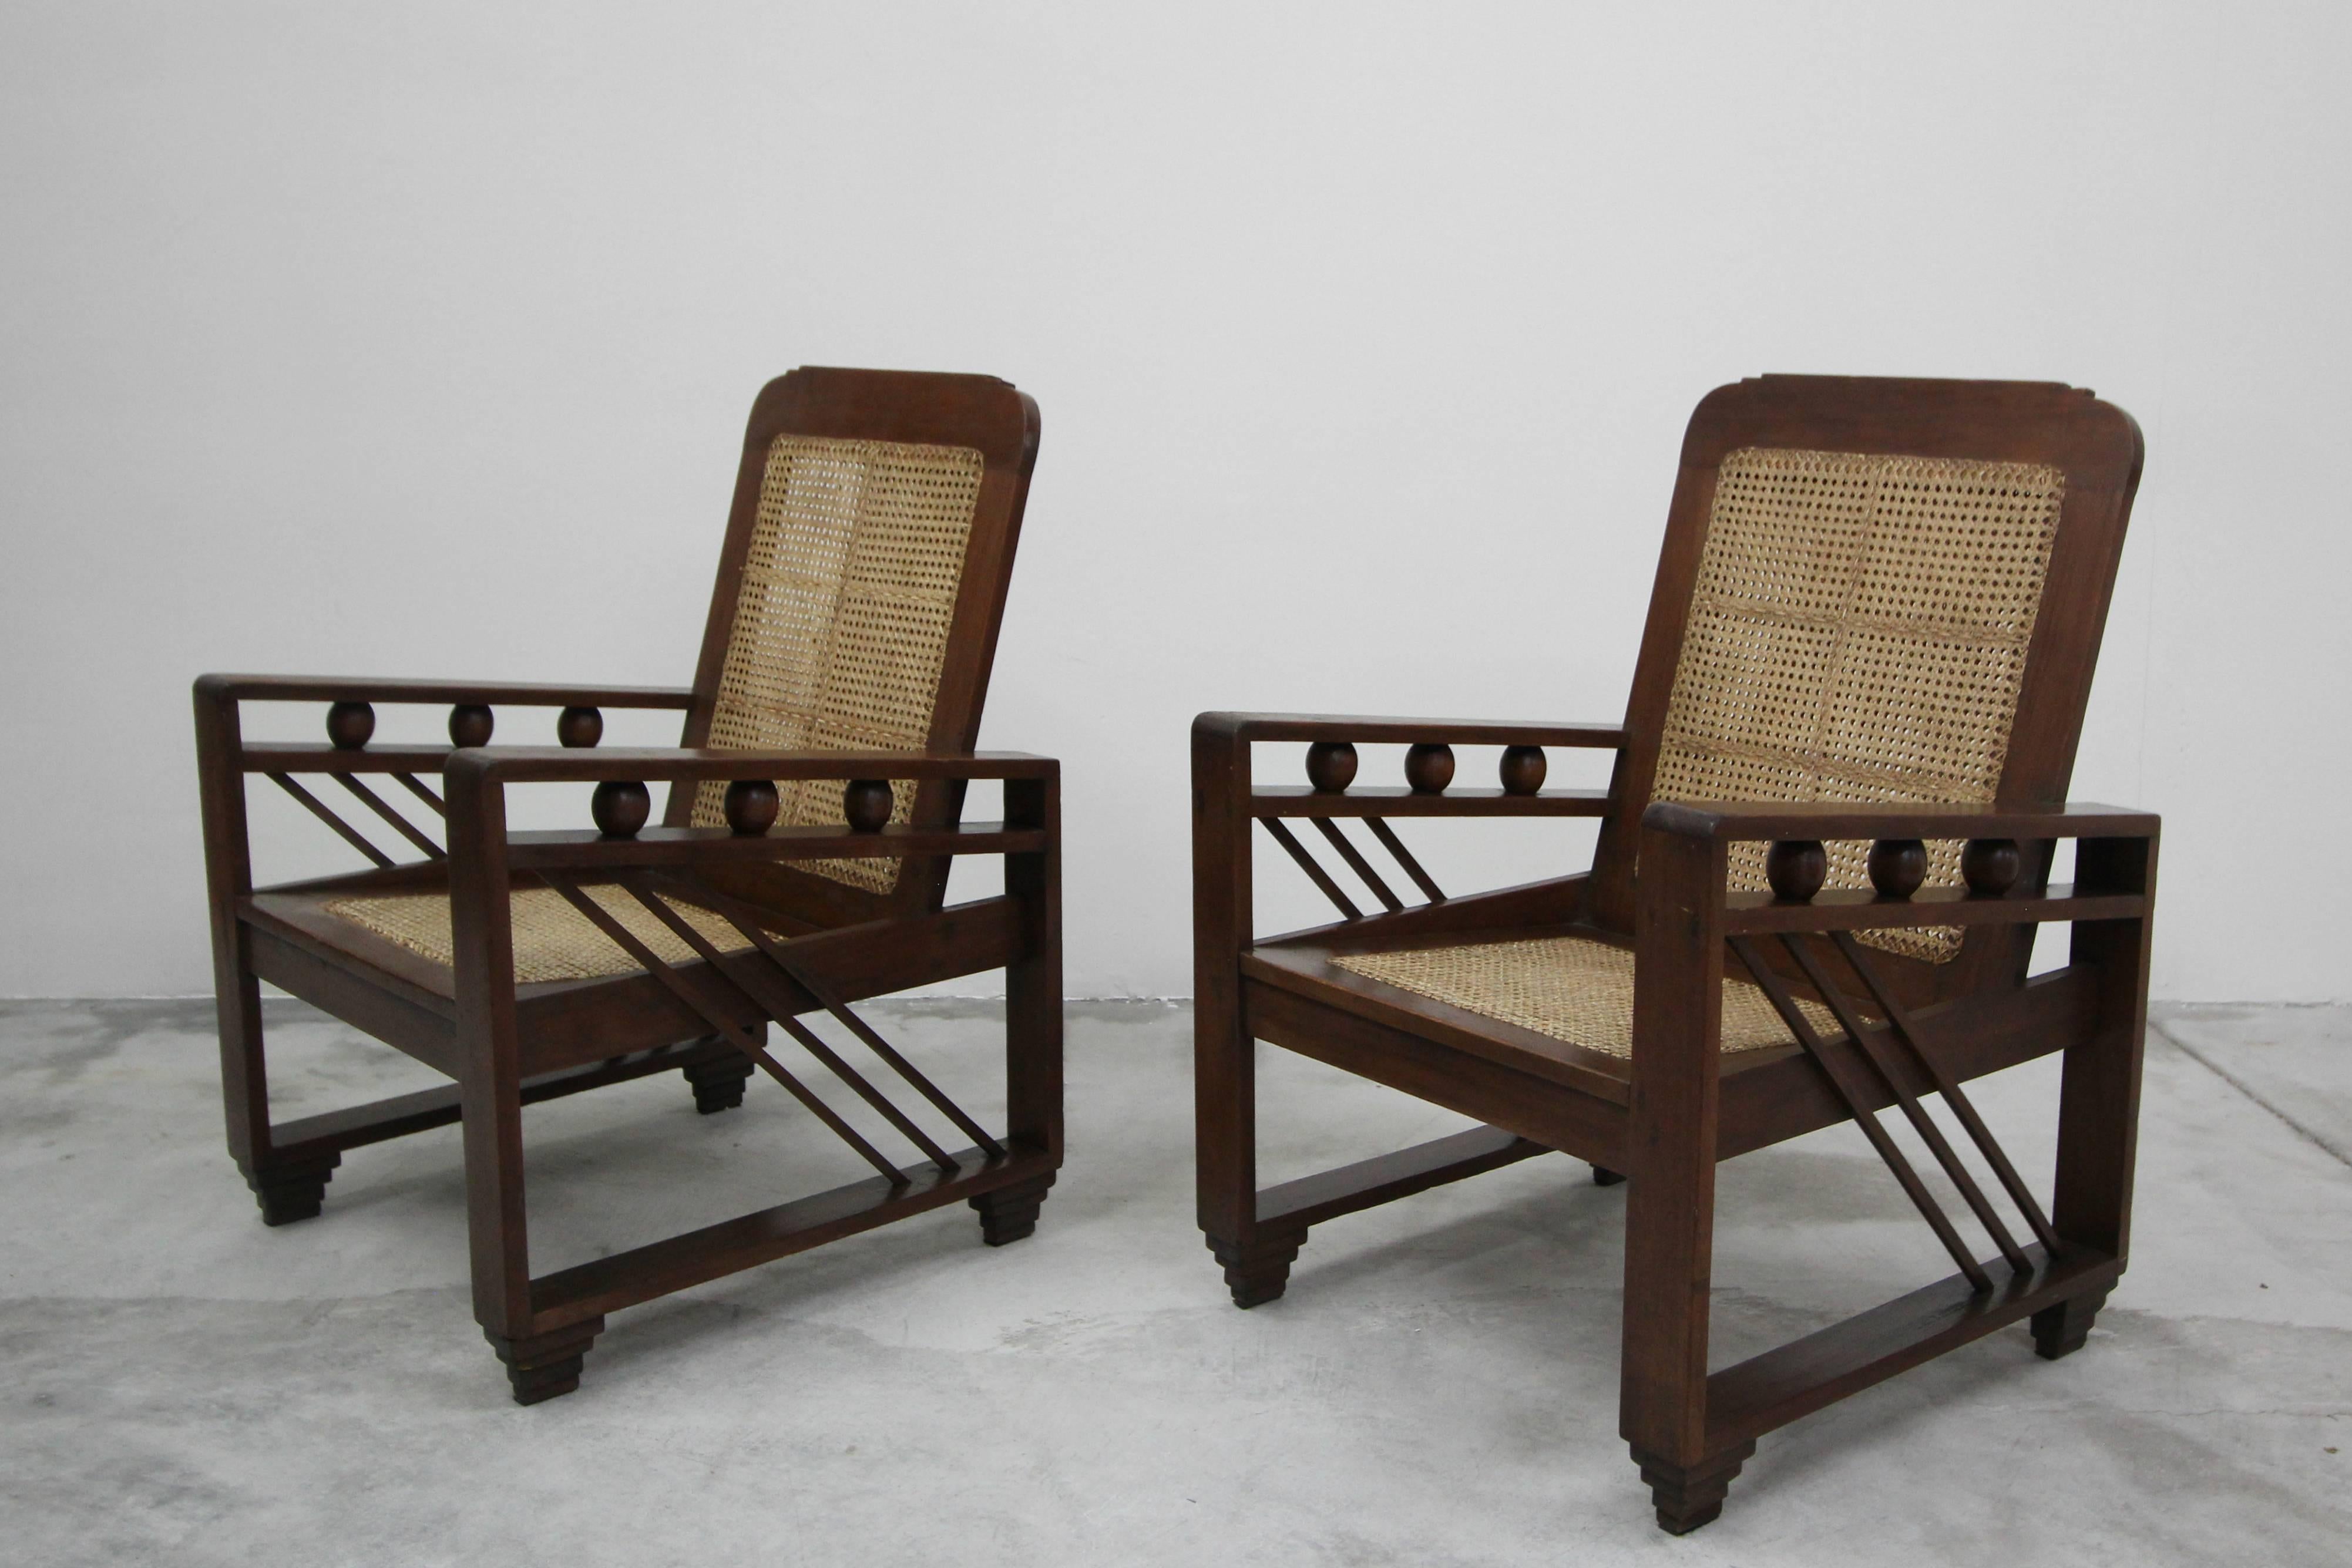 This pair of authentic Art Deco lounge chairs is nothing short of rare and amazing. They have the most amazing details that give them insurmountable style. These beauties are a site to behold, art actually.

These chairs are solid and in excellent